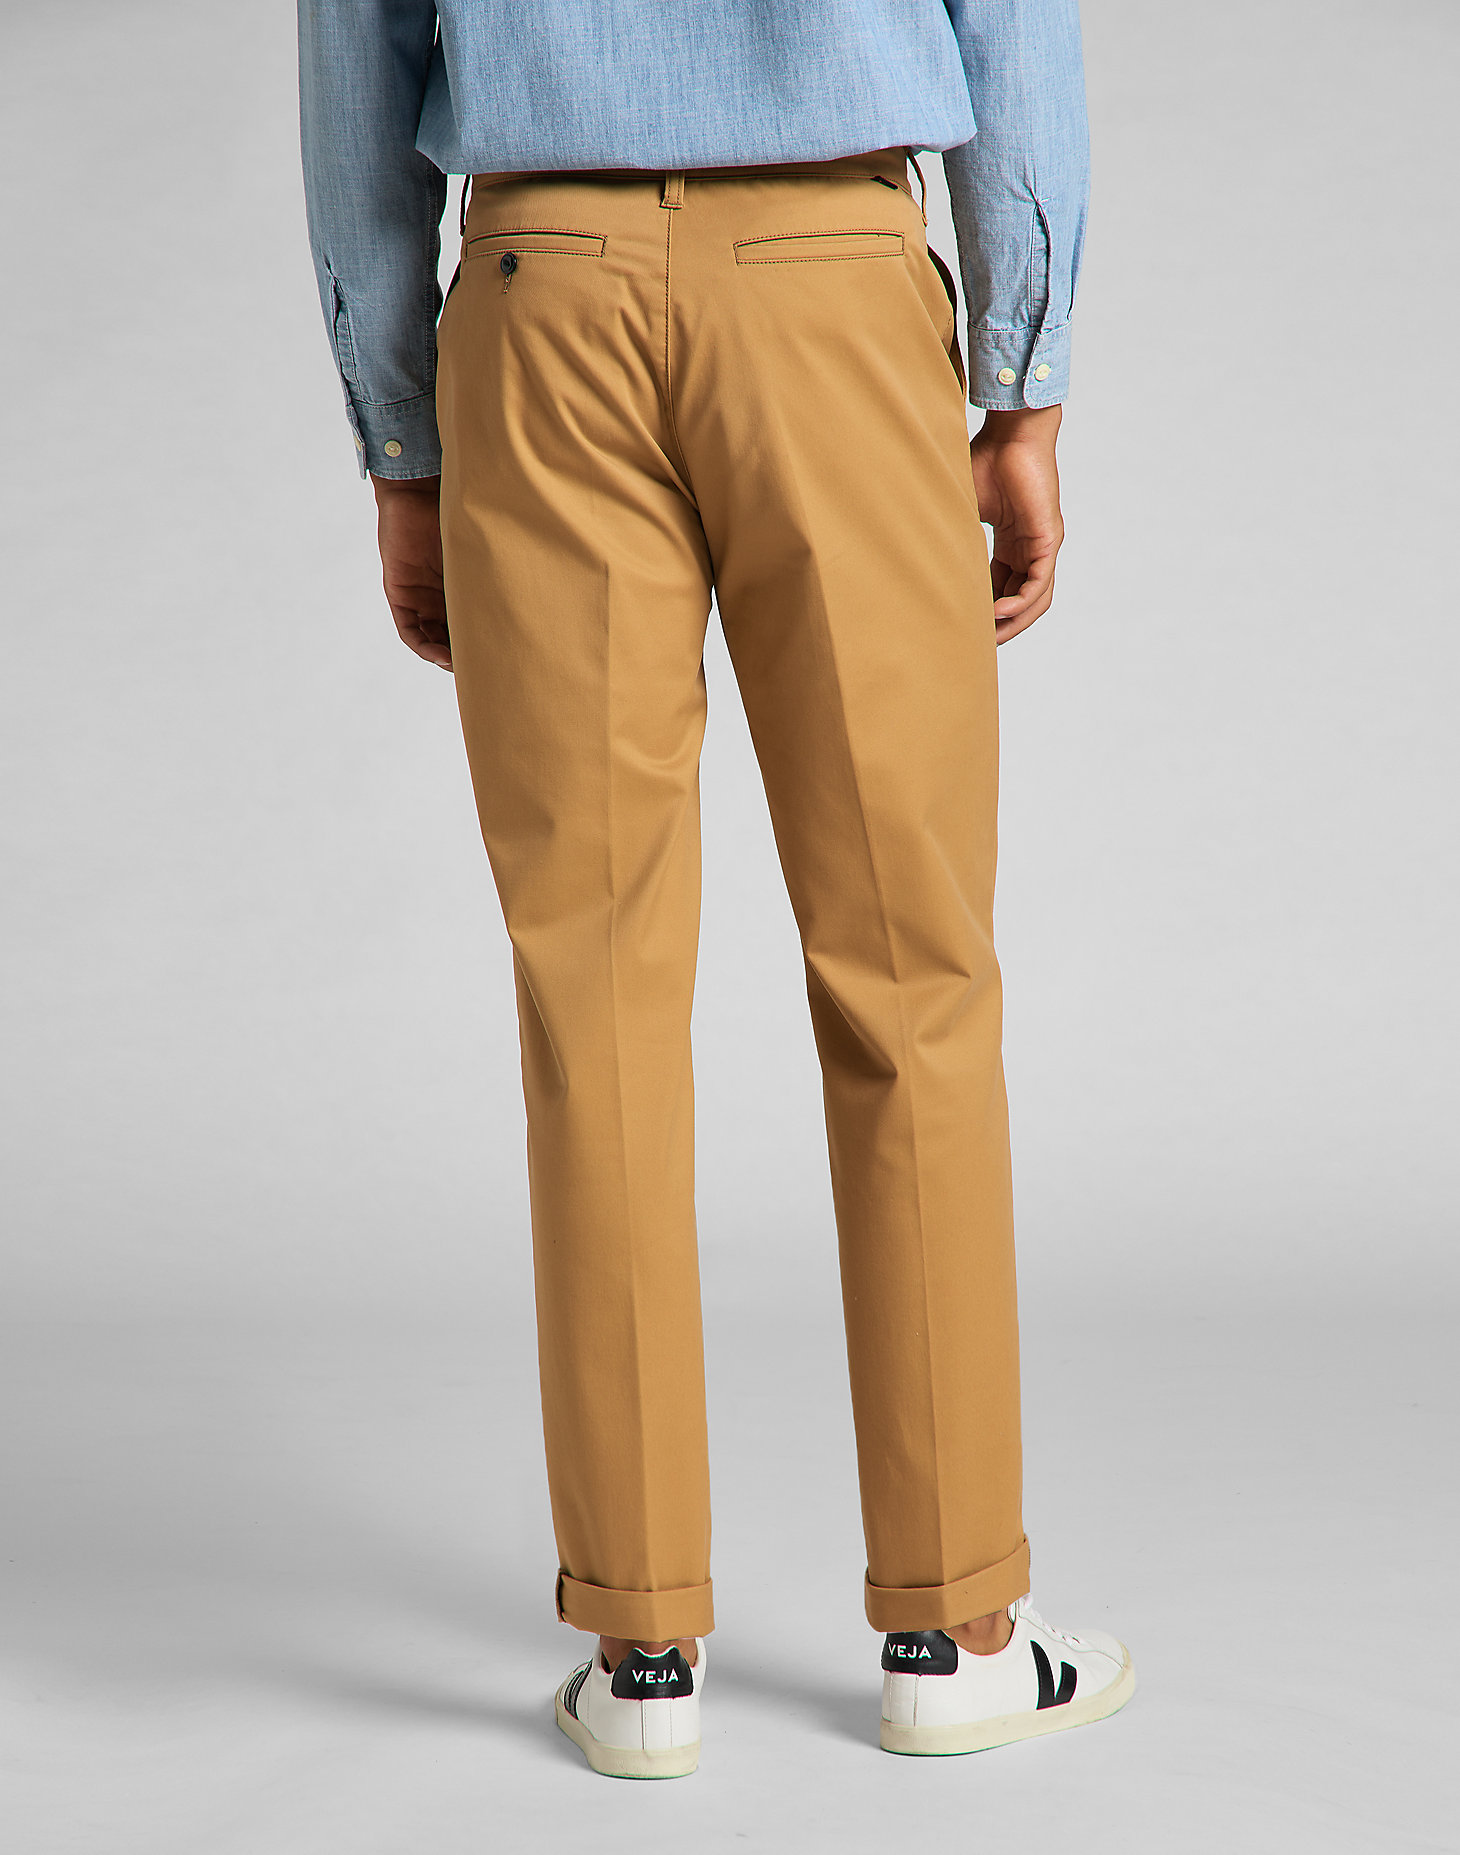 Tapered Chino in Tobacco Brown alternative view 1